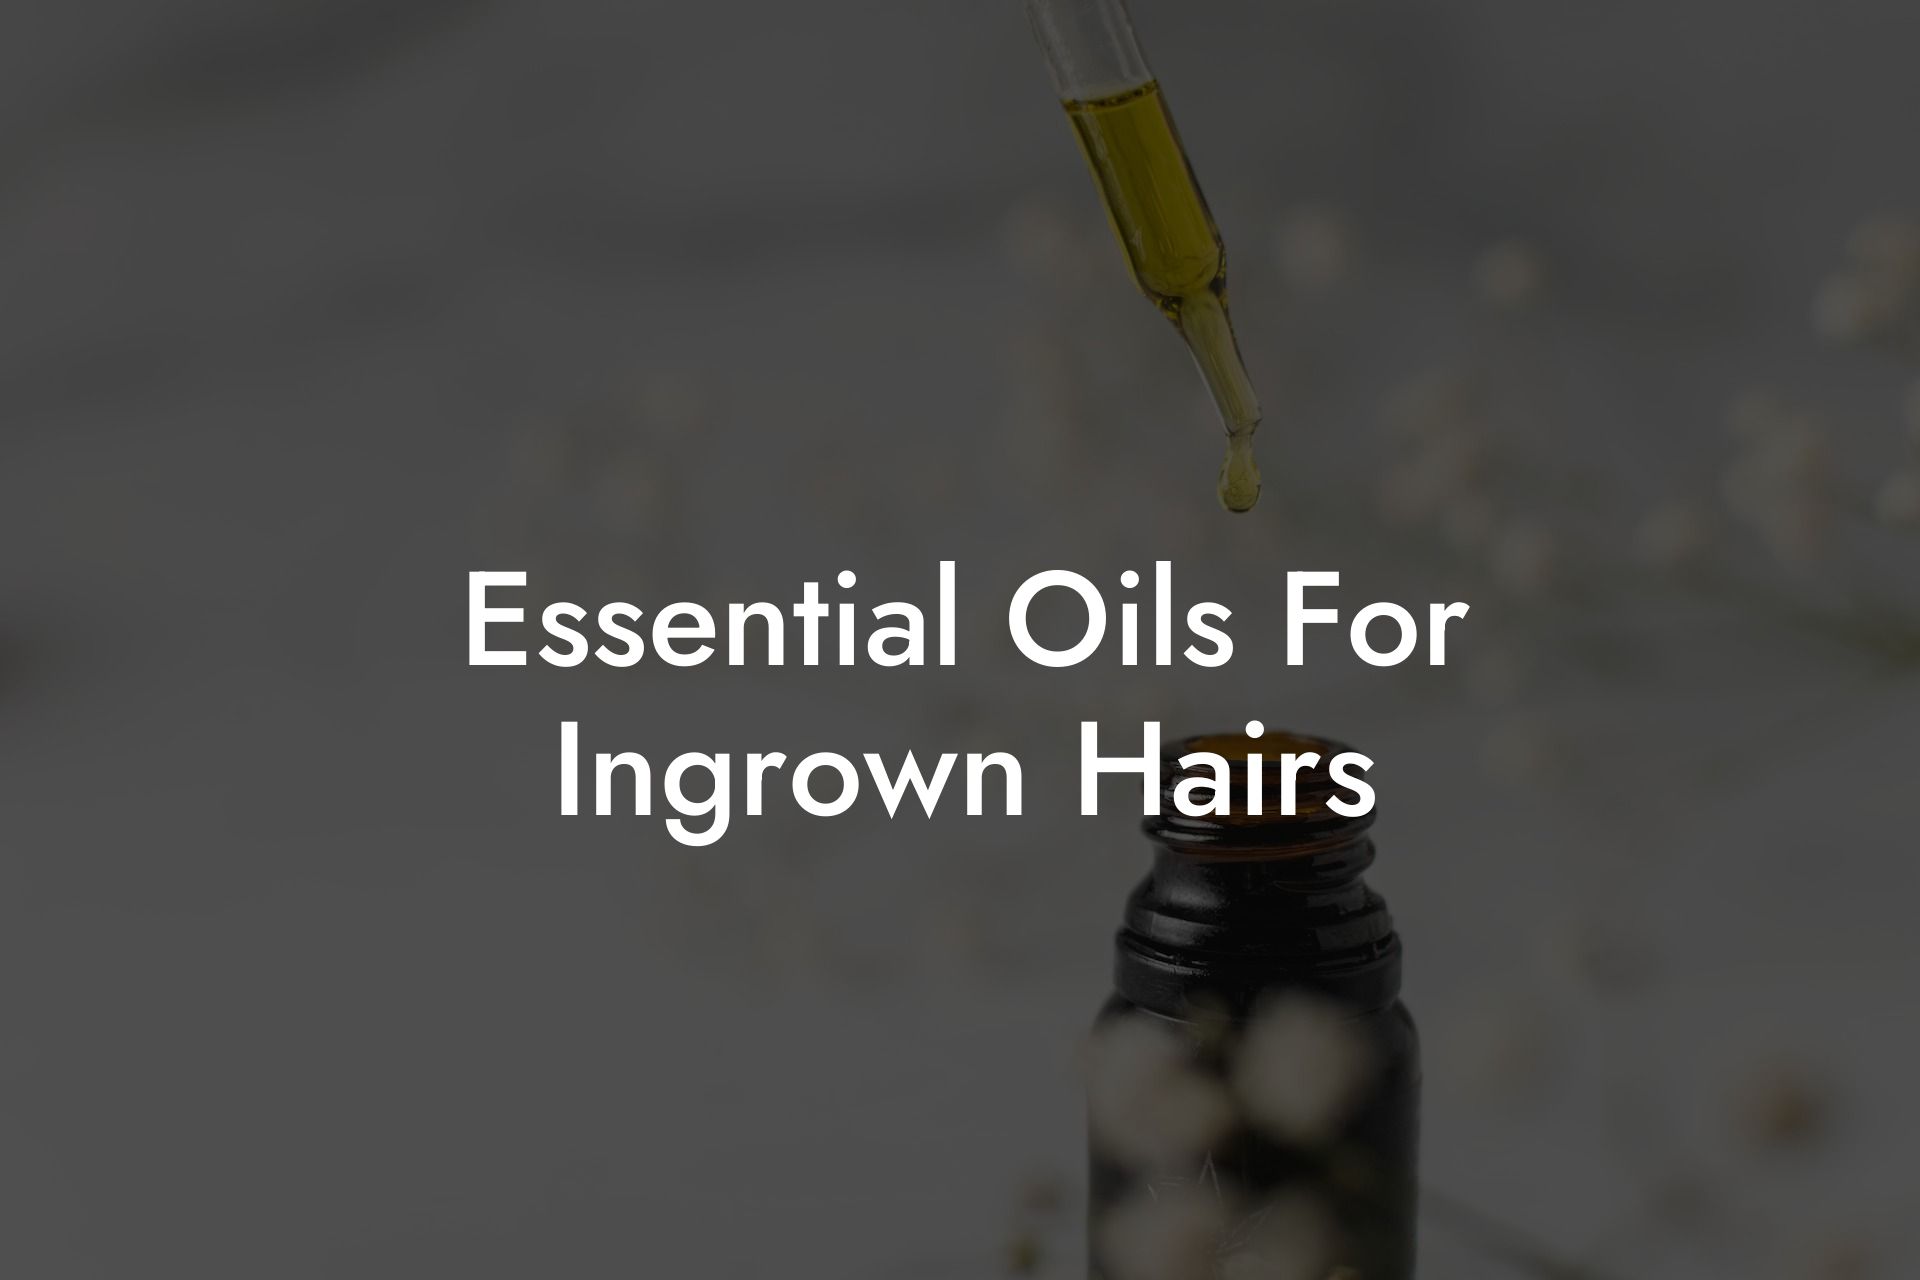 Essential Oils For Ingrown Hairs